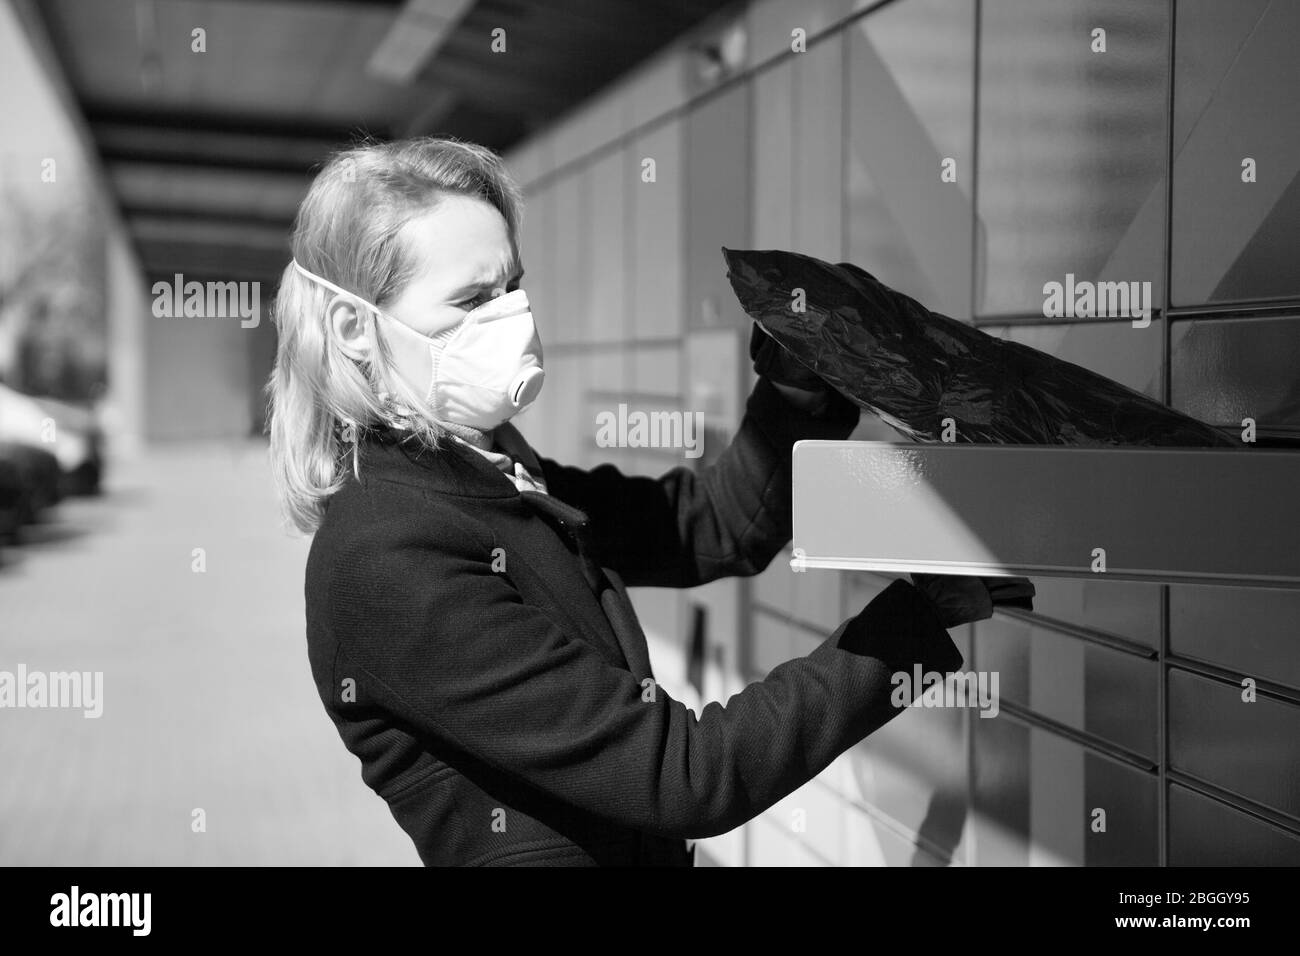 lady wearing a face mask receives a parcel or package from a post parcel terminal in Tallinn. woman wearing a face respiratory mask -protecting from Stock Photo